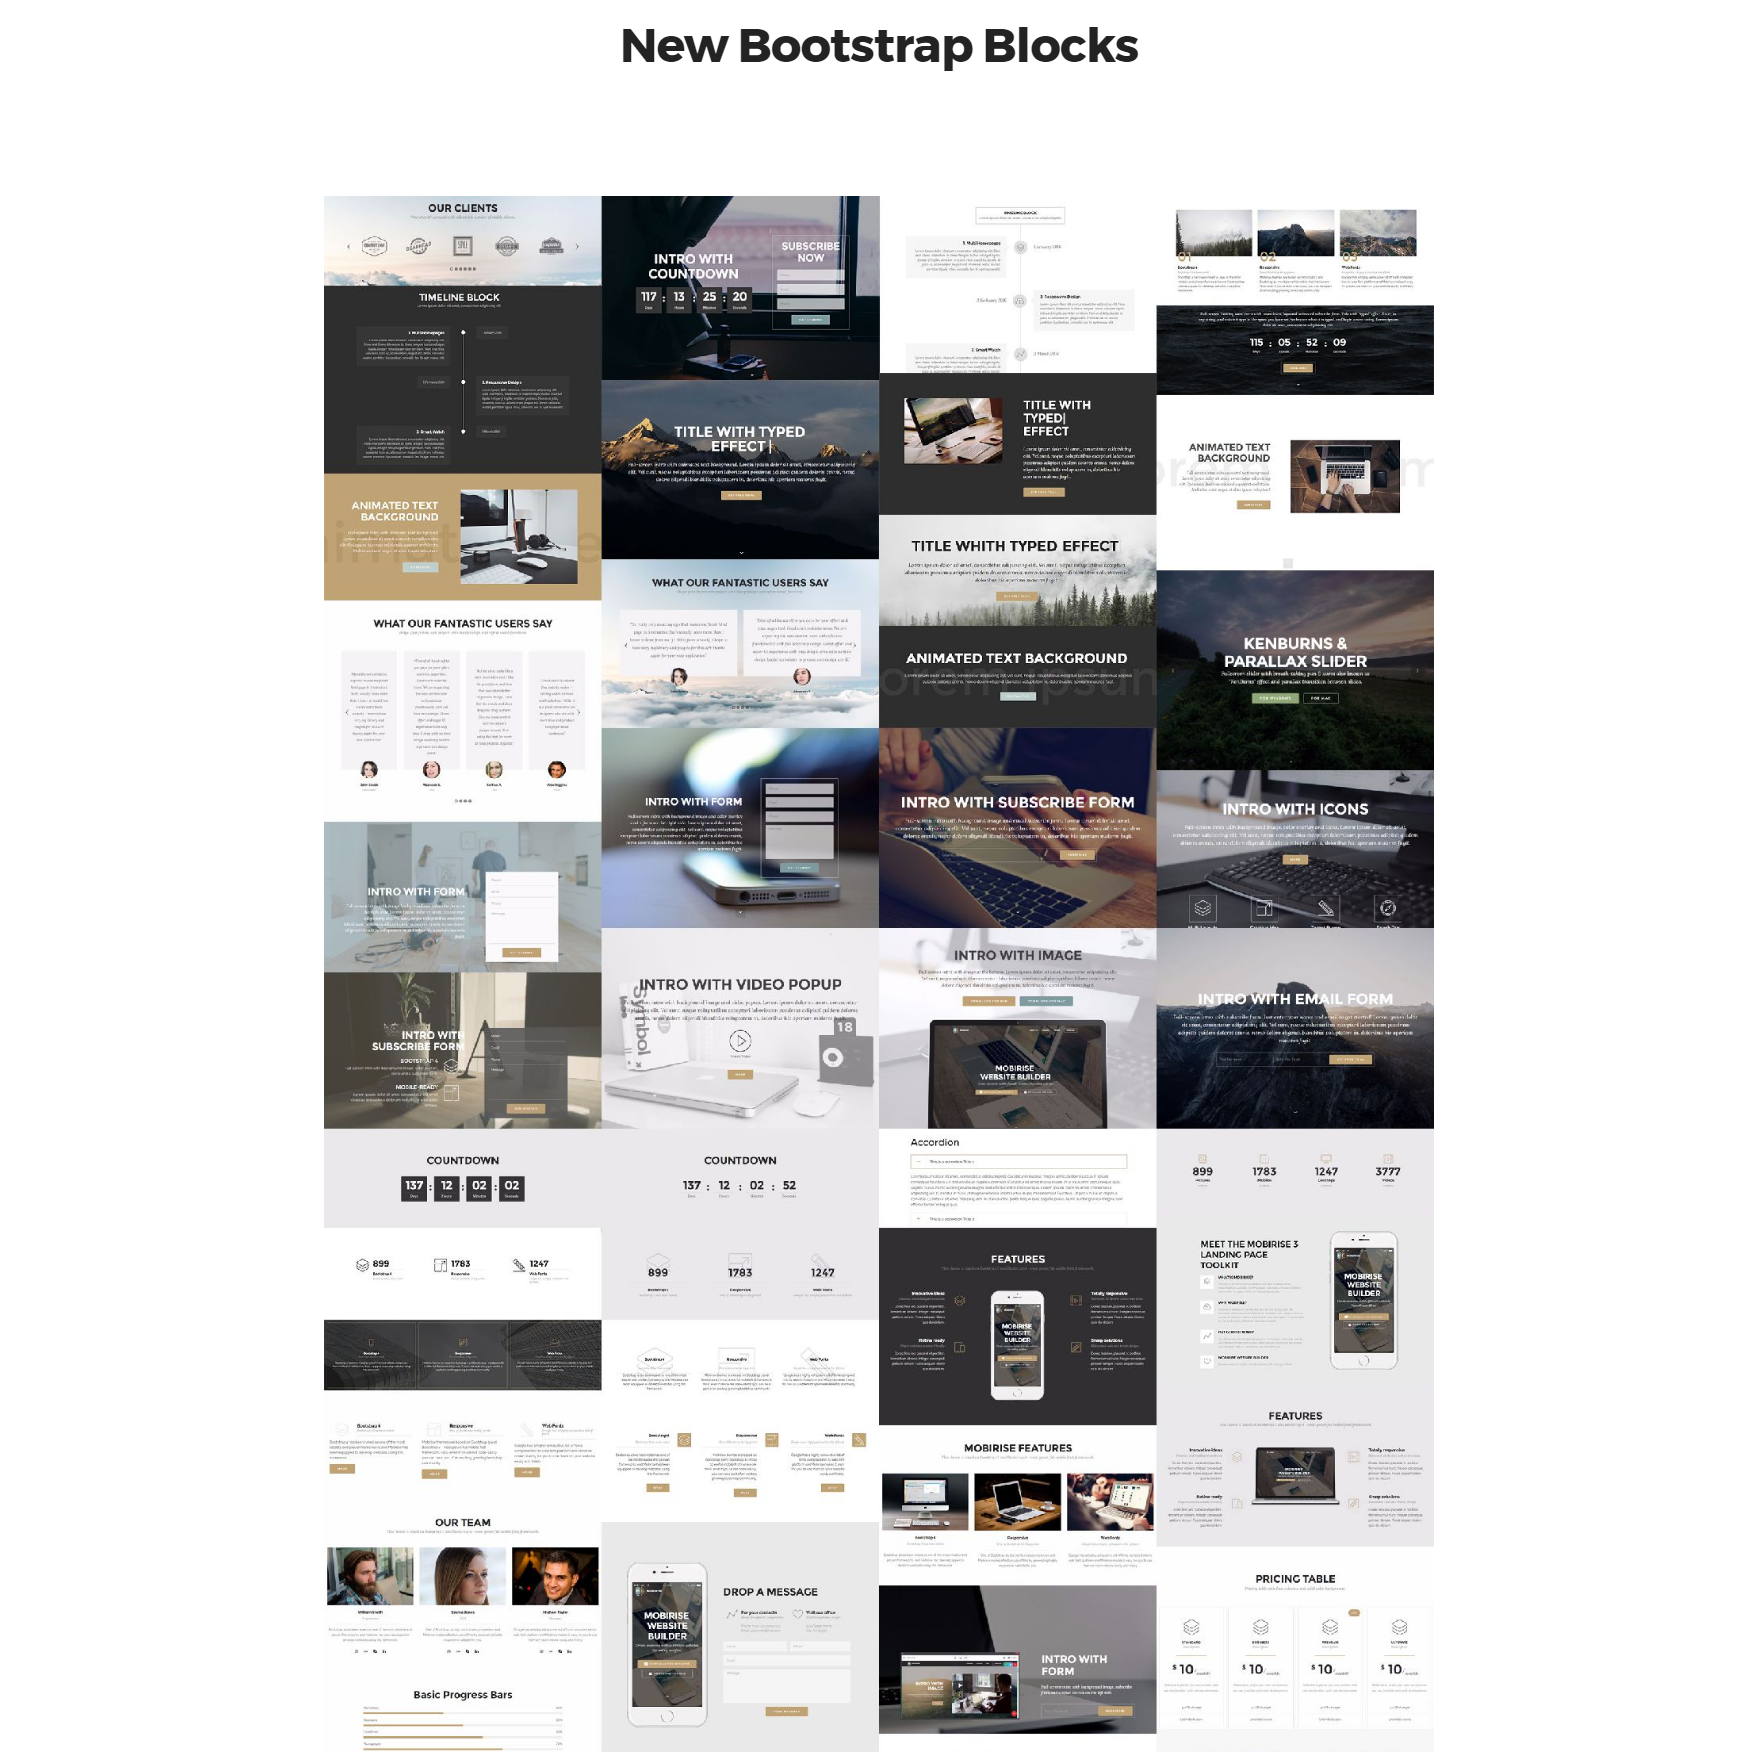 HTML5 Bootstrap 4 mobile-friendly blocks Themes